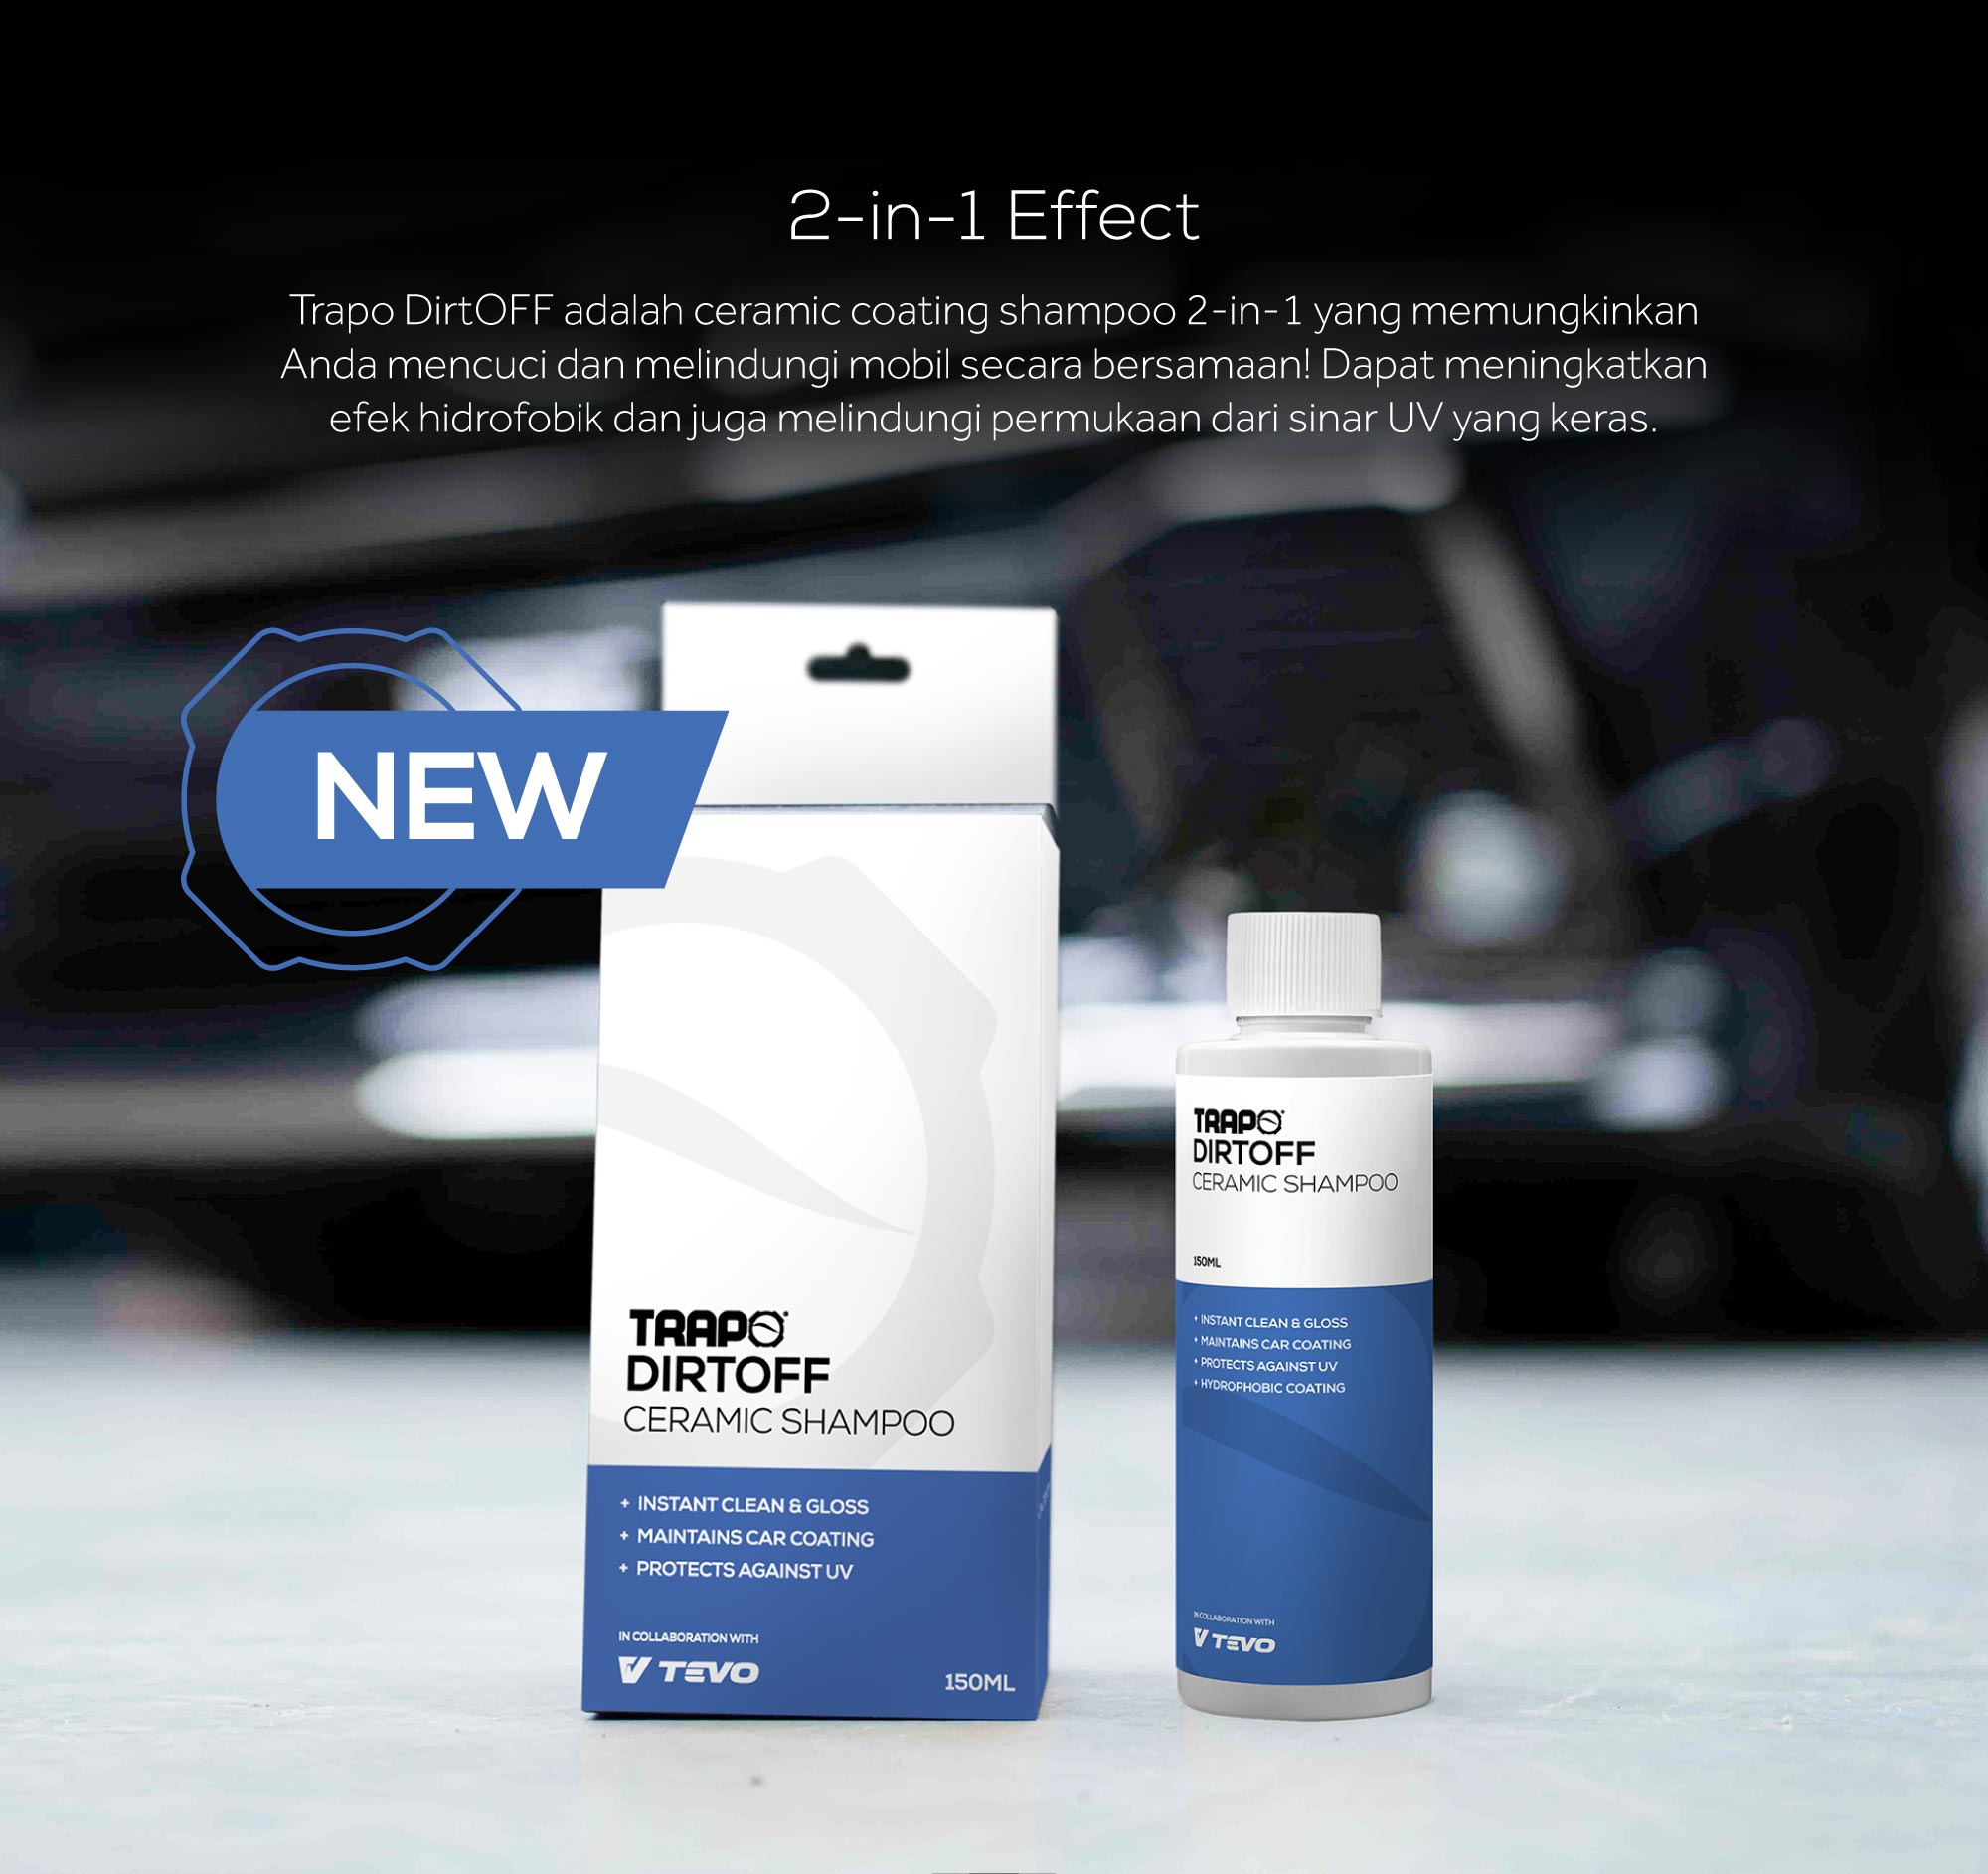 Shine and protects.The Oxtra Shineguard Car Coating is a car protective coating with a durability of up to 3 months that provides 3-in 1 protection such as improve gloss,waterbeading and UV protection against harsh weather conditions